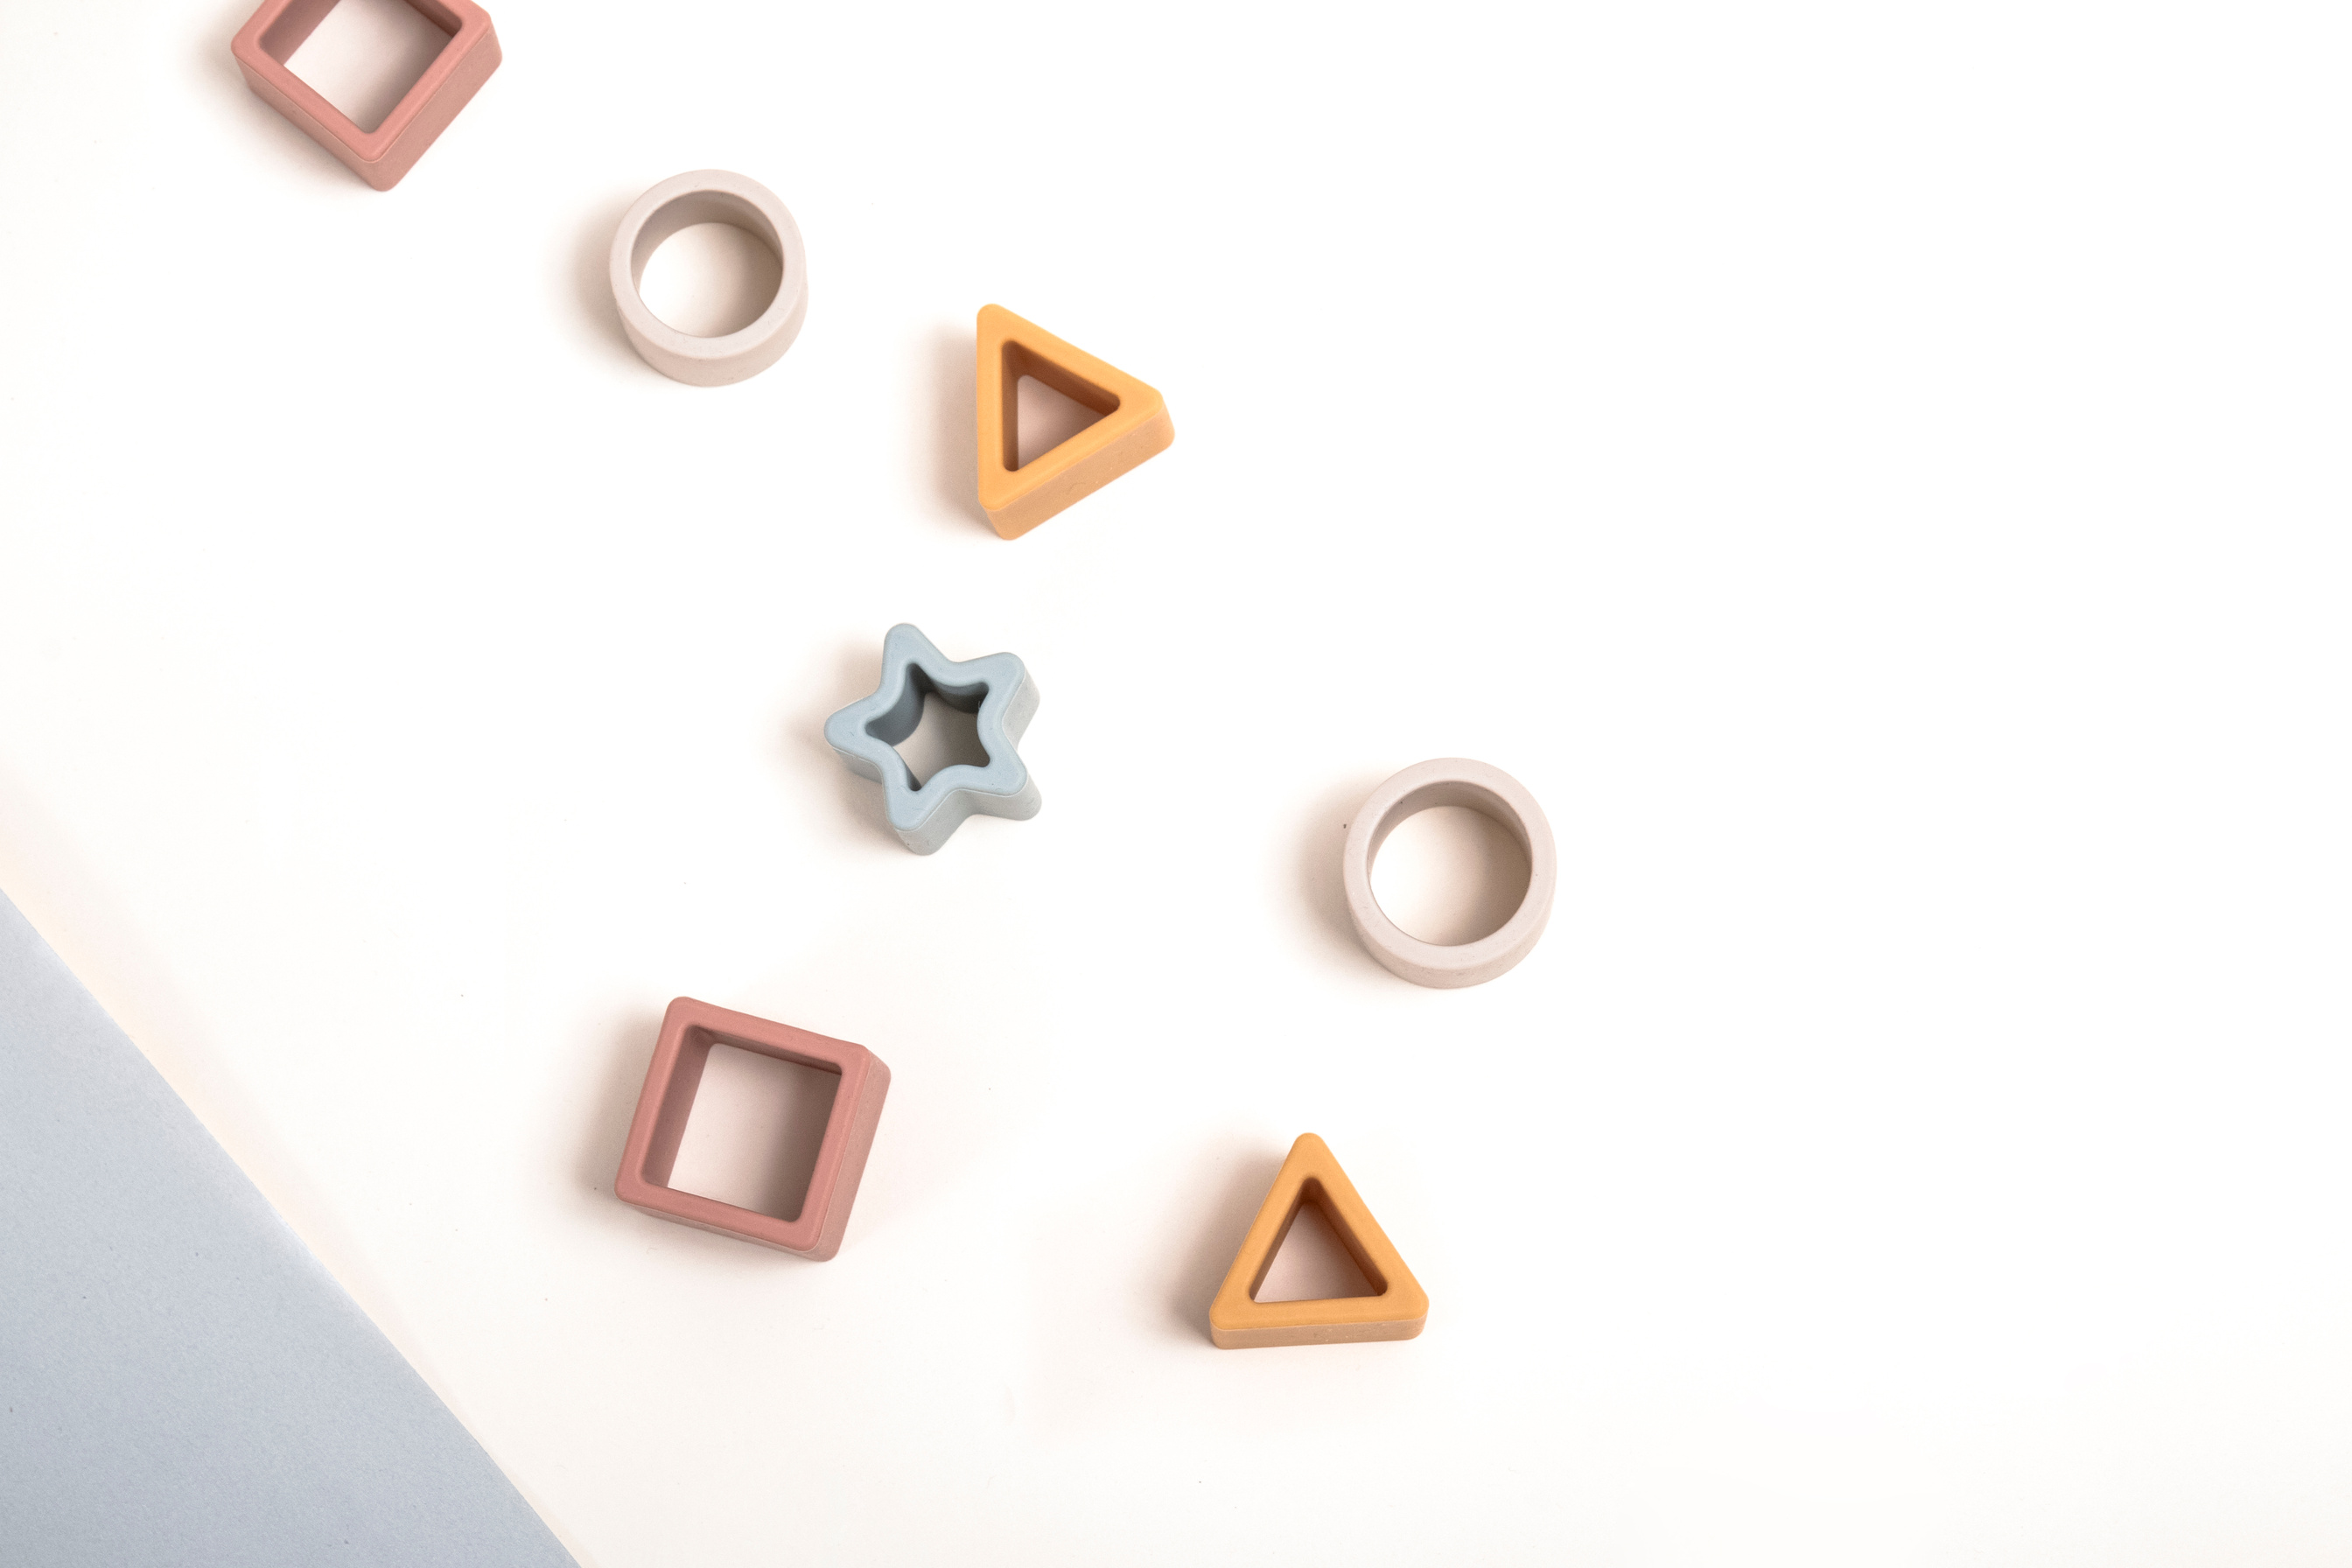 Wooden Toy Shapes on White Background 